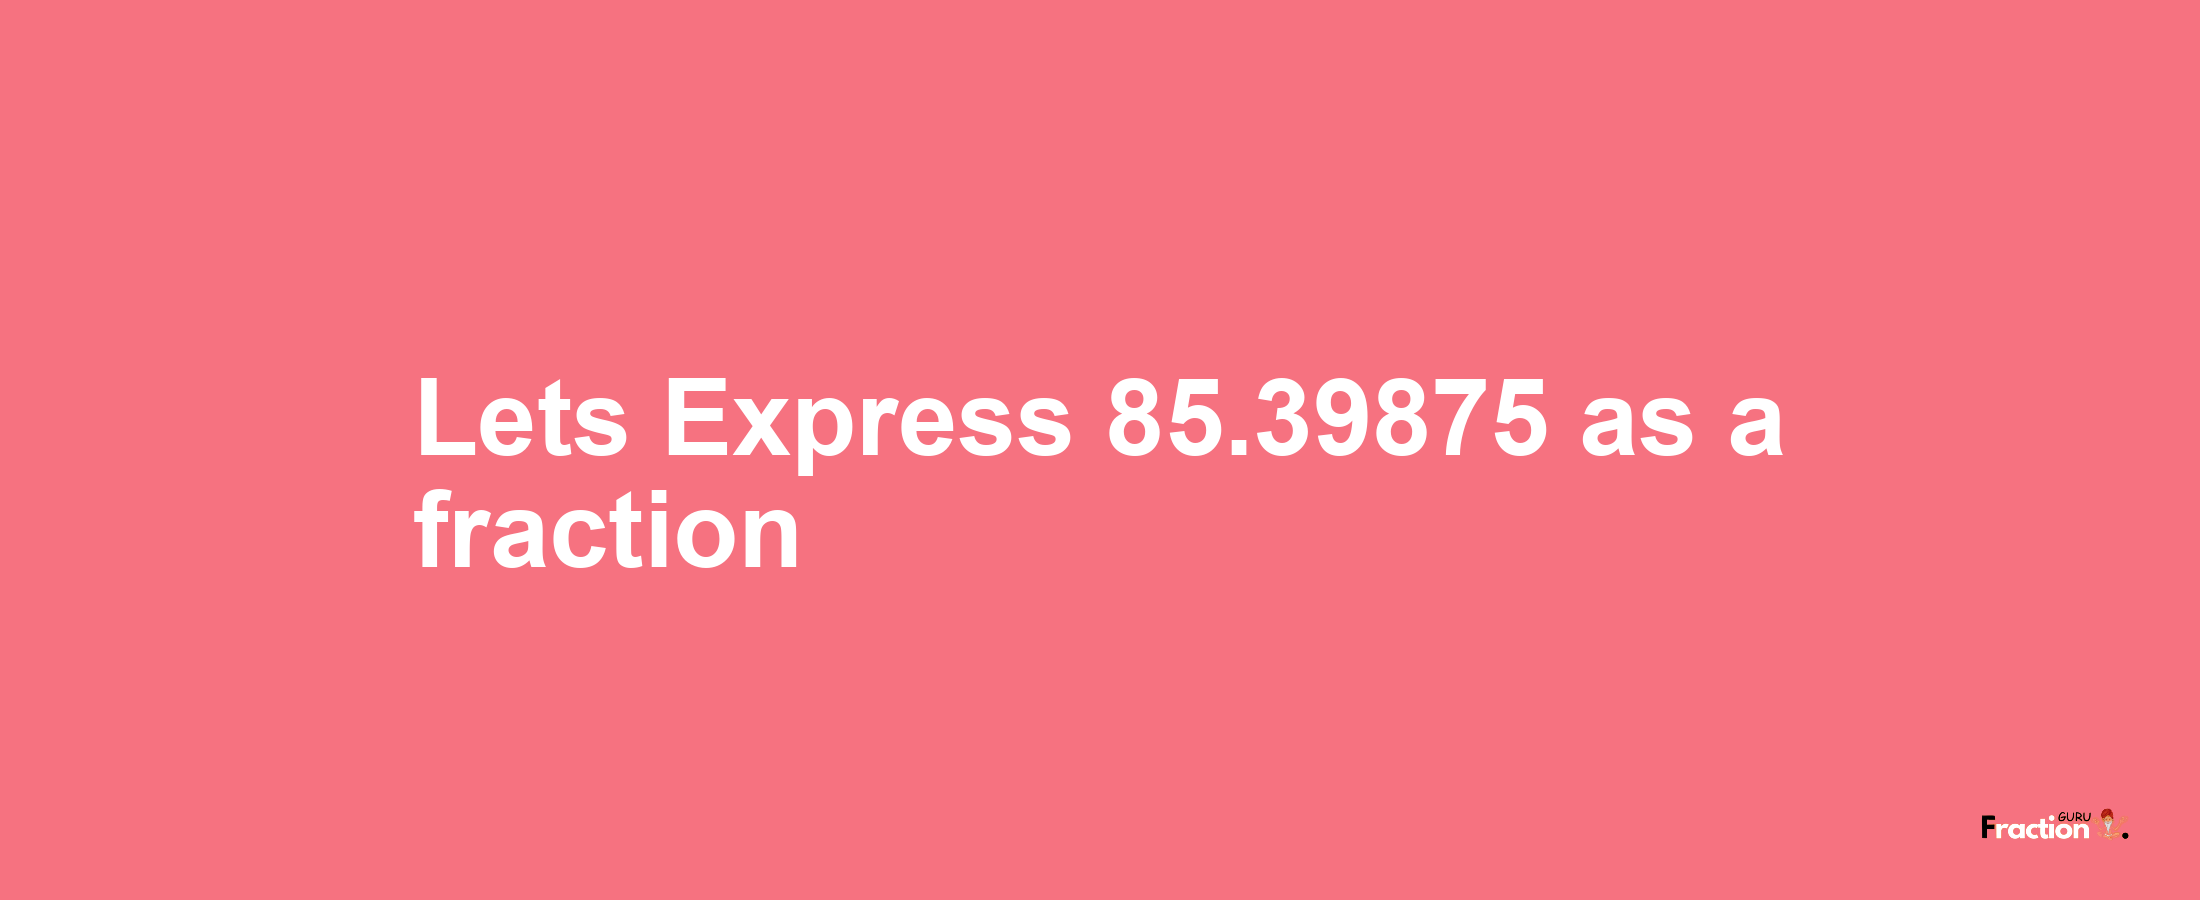 Lets Express 85.39875 as afraction